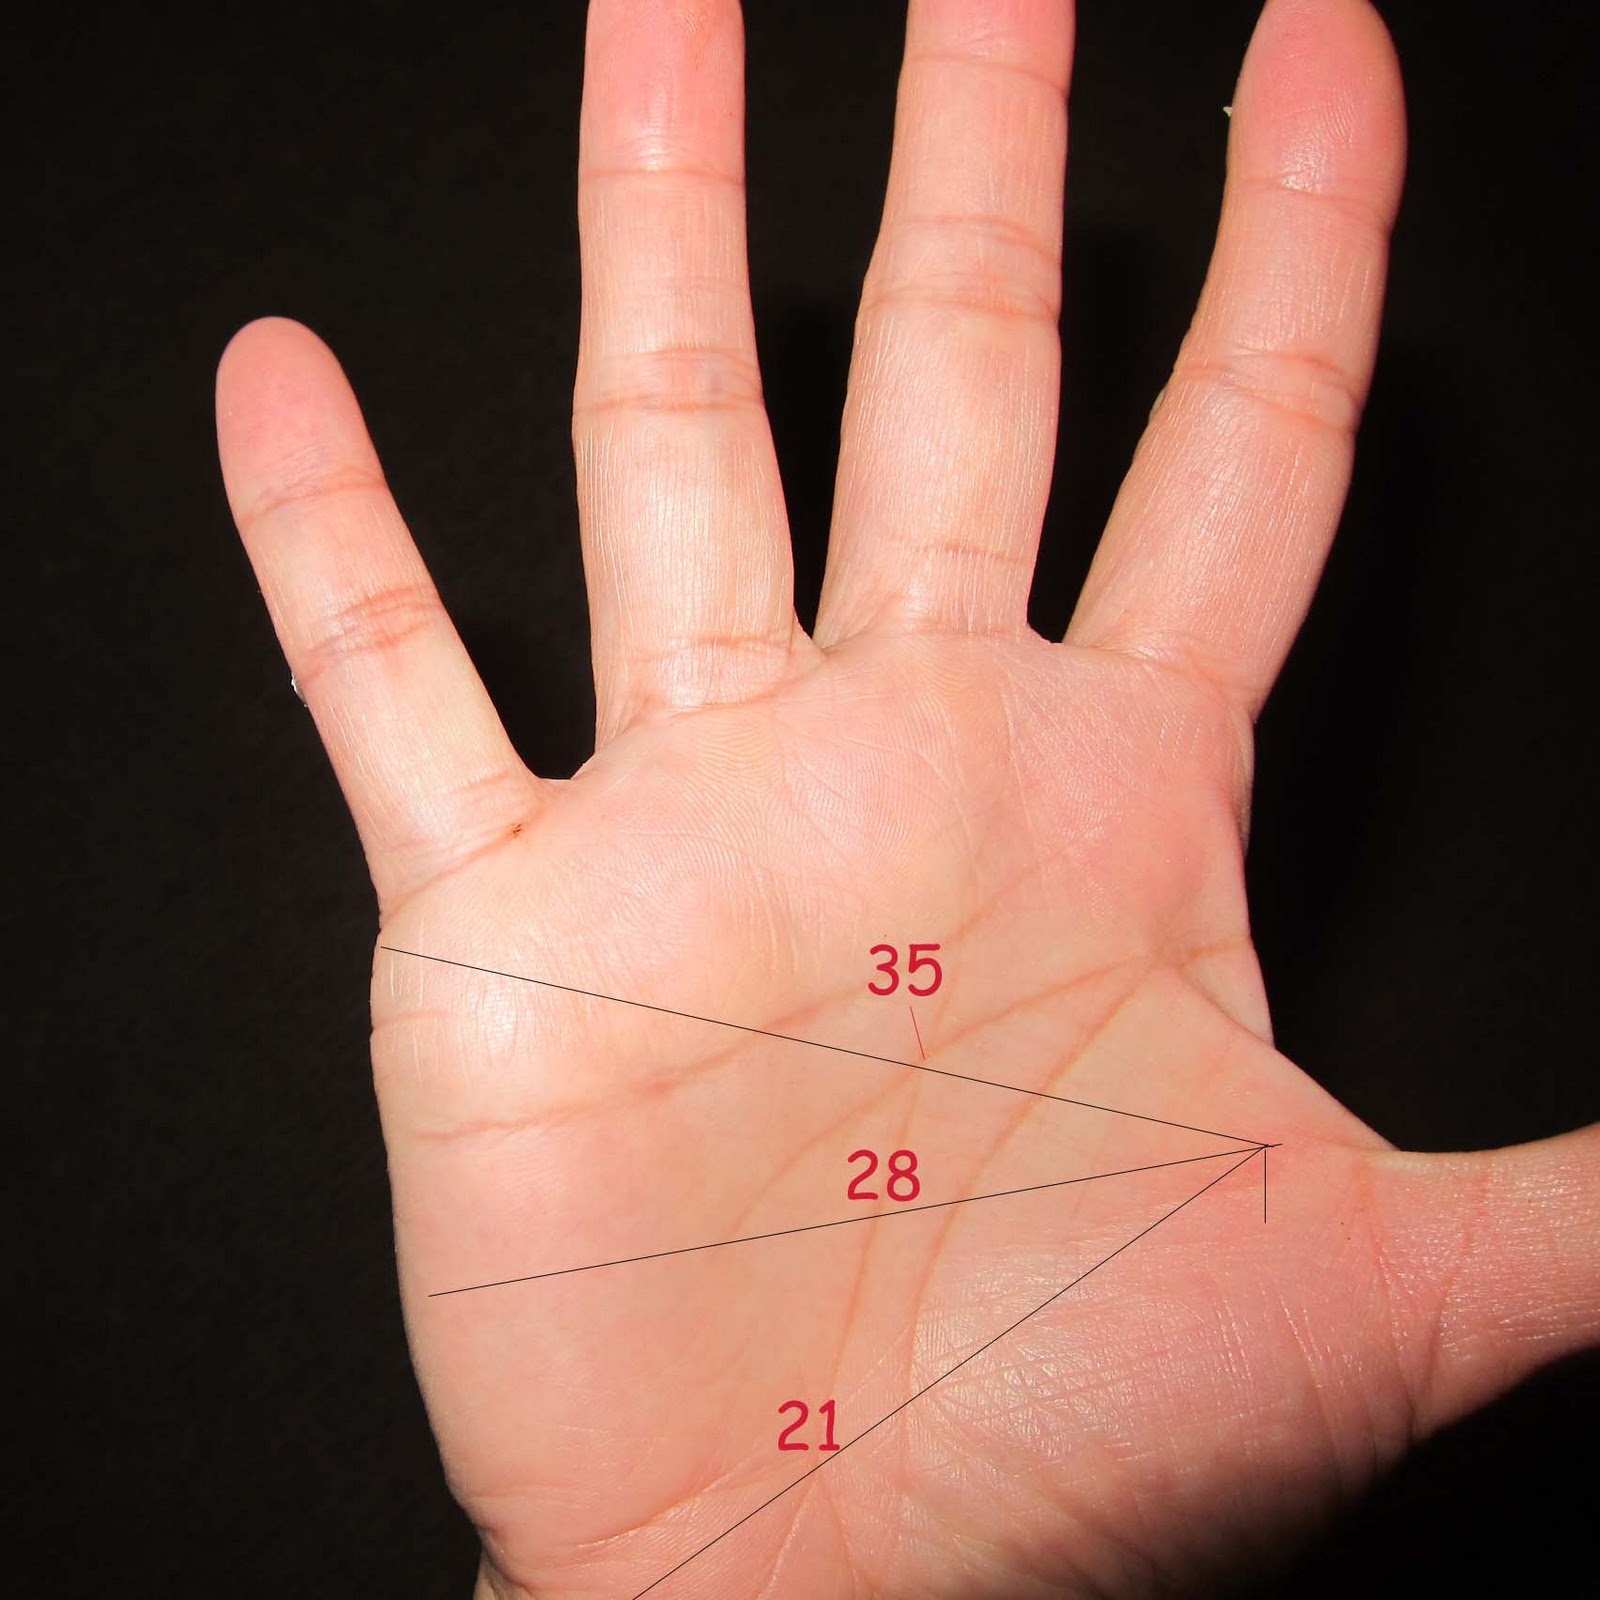 palmistry: Know your Future: 2010